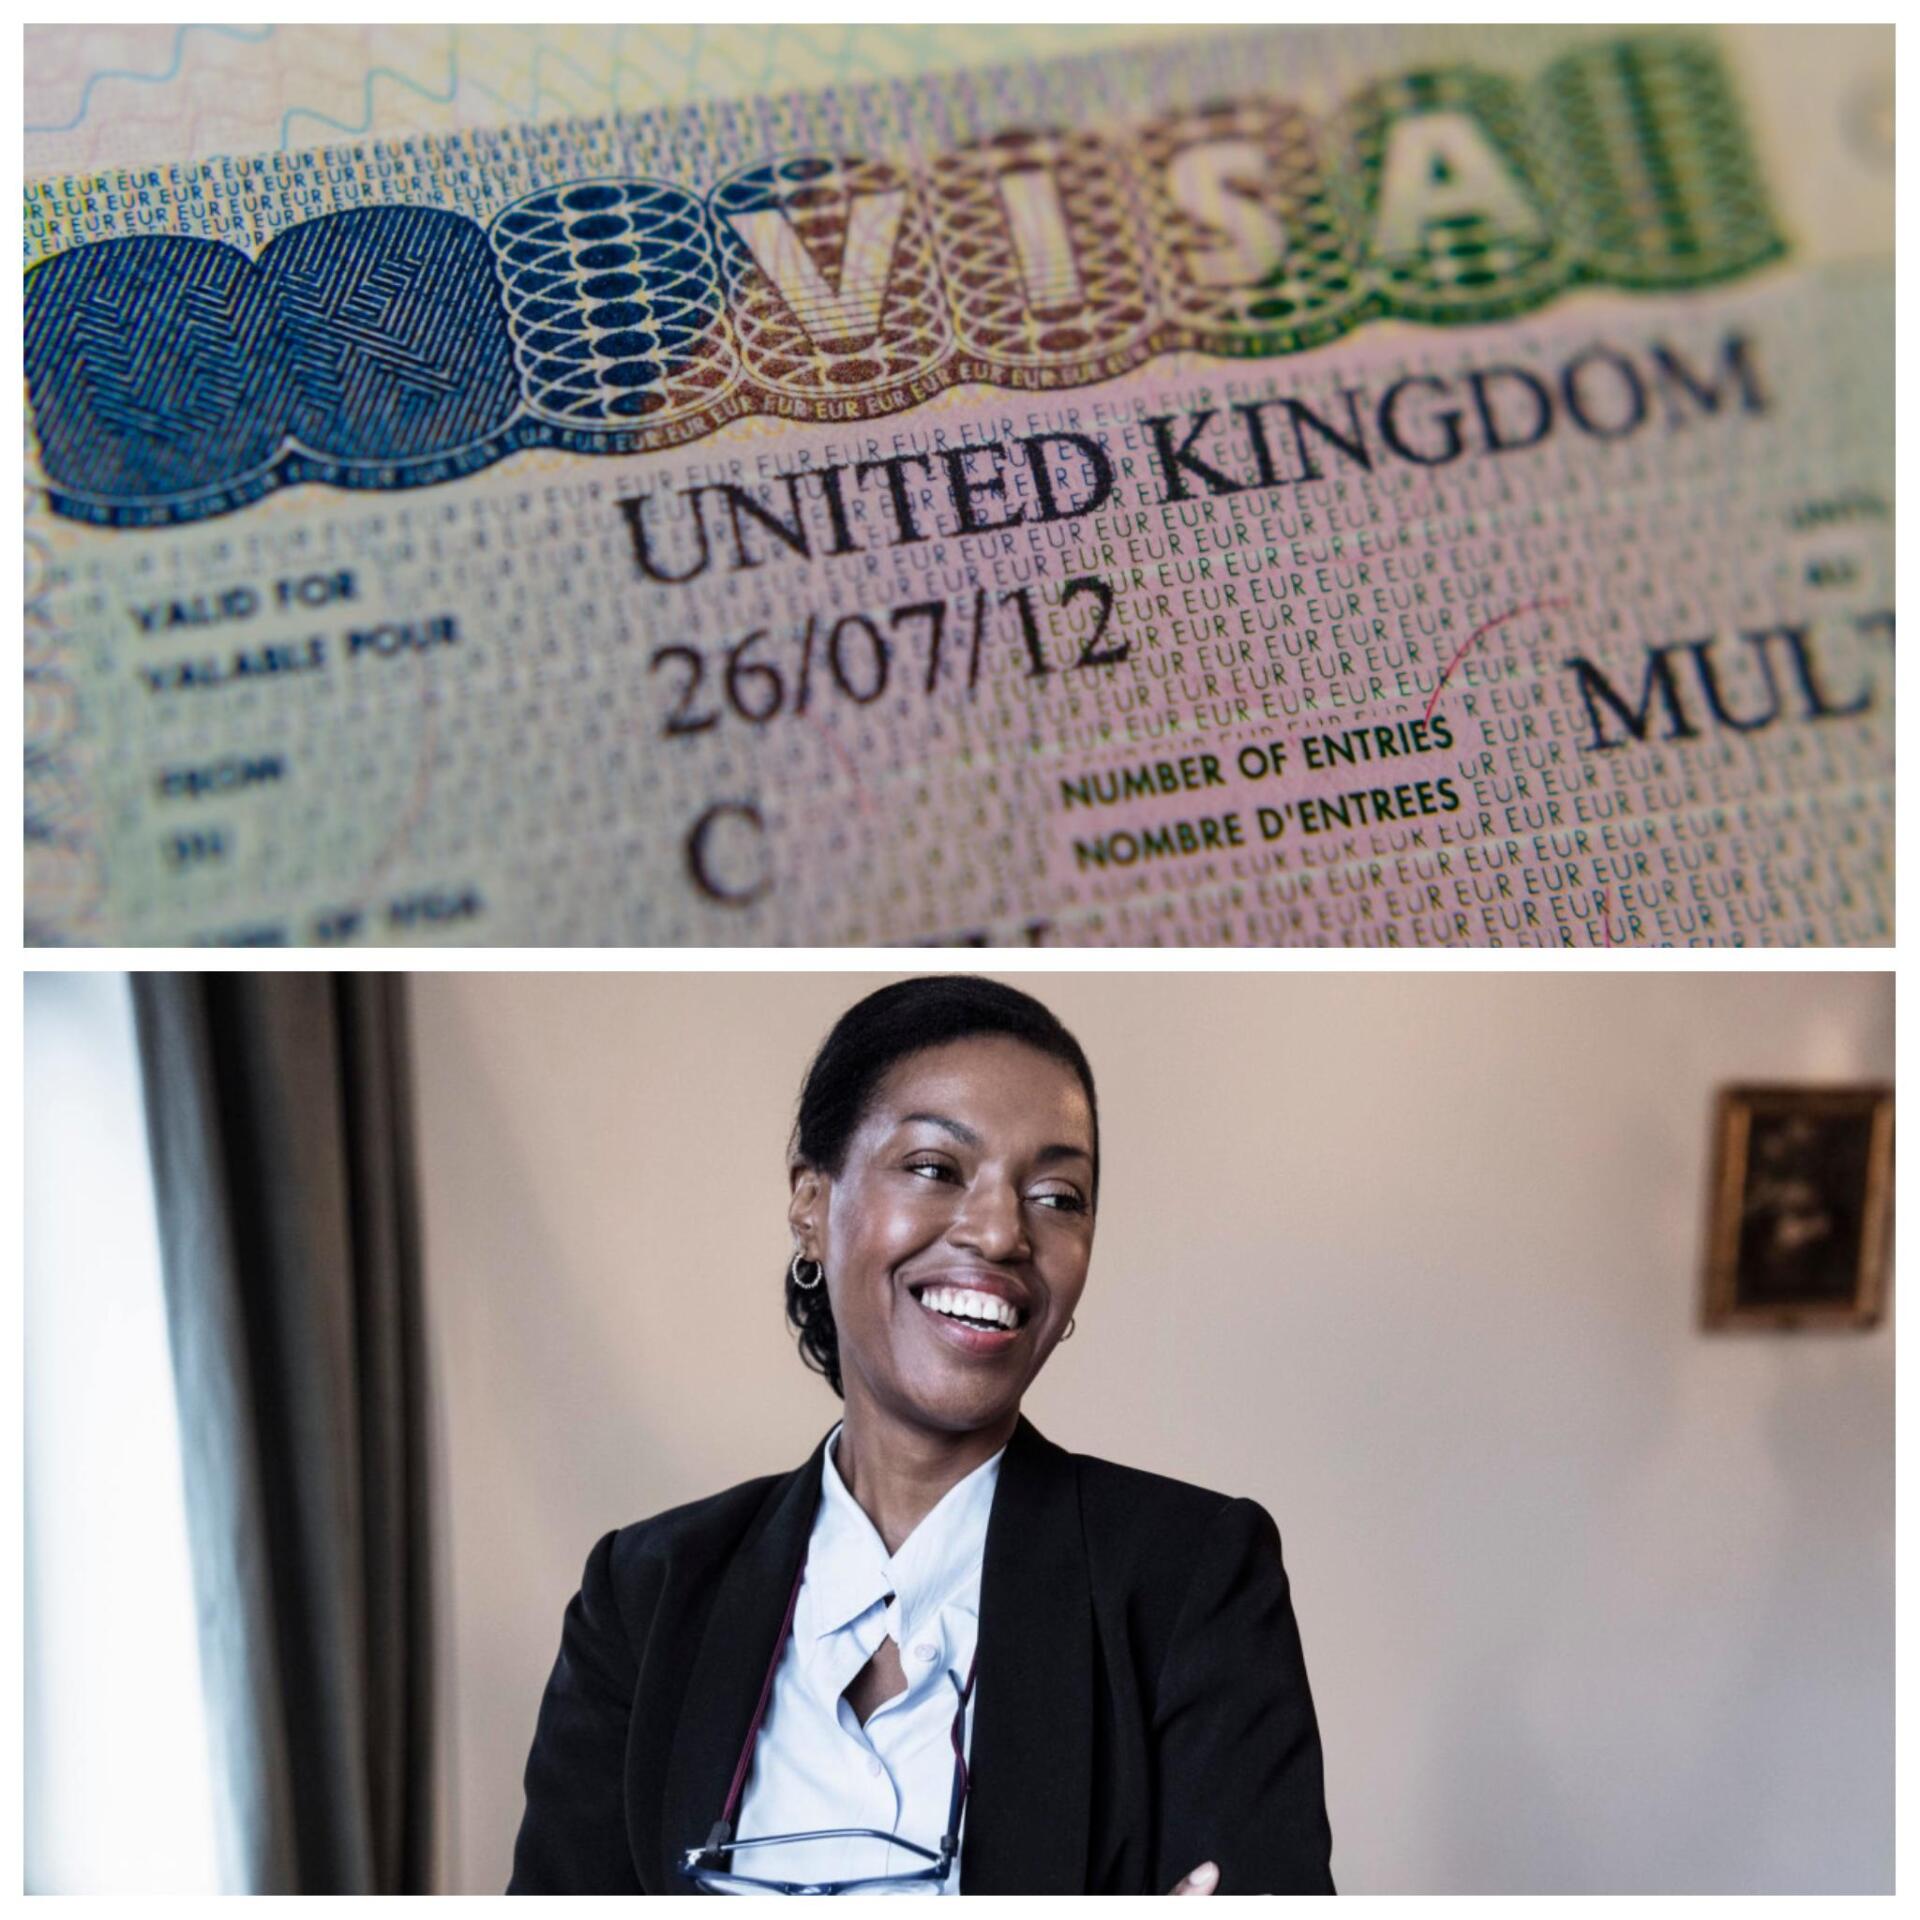 UK Immigration lawyers in Holborn London with visa stamp image